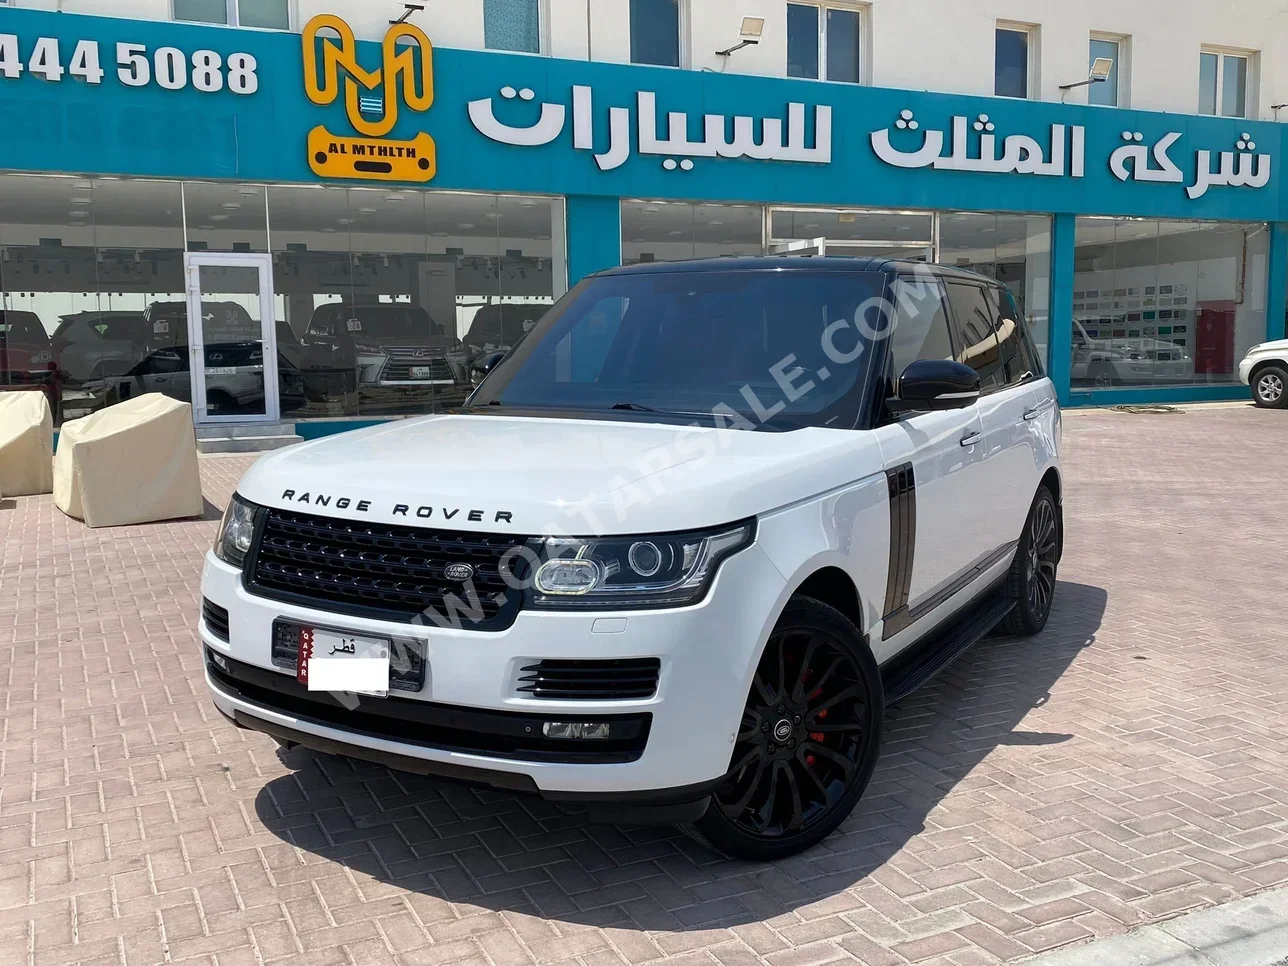 Land Rover  Range Rover  Vogue SE Super charged  2014  Automatic  187,000 Km  8 Cylinder  Four Wheel Drive (4WD)  SUV  White